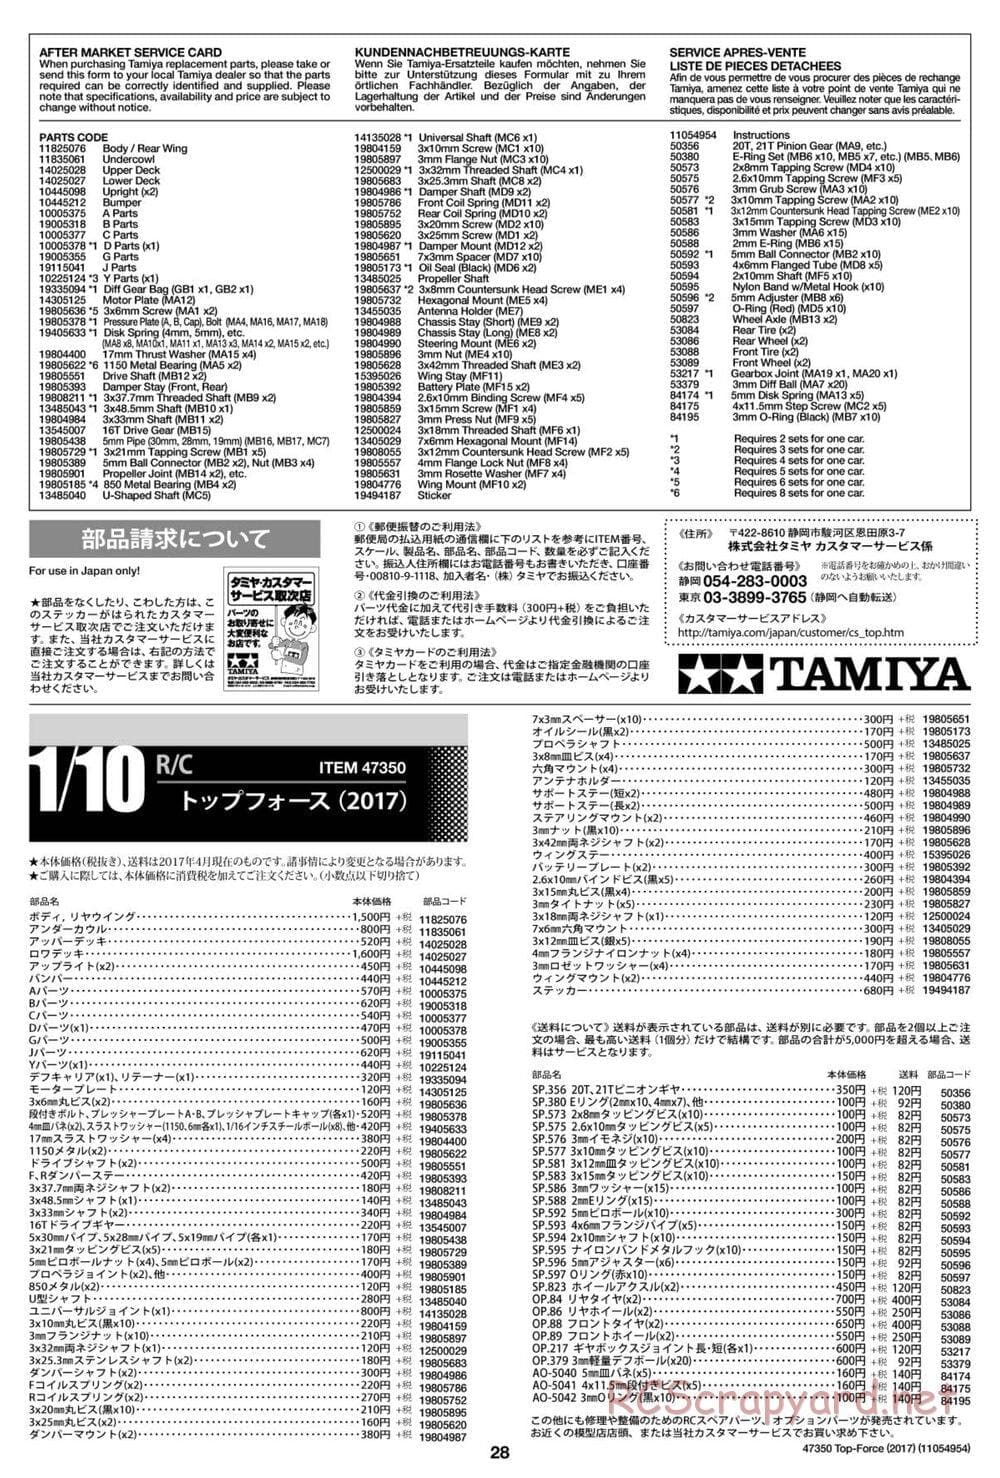 Tamiya - Top Force 2017 - DF-01 Chassis - Manual - Page 28